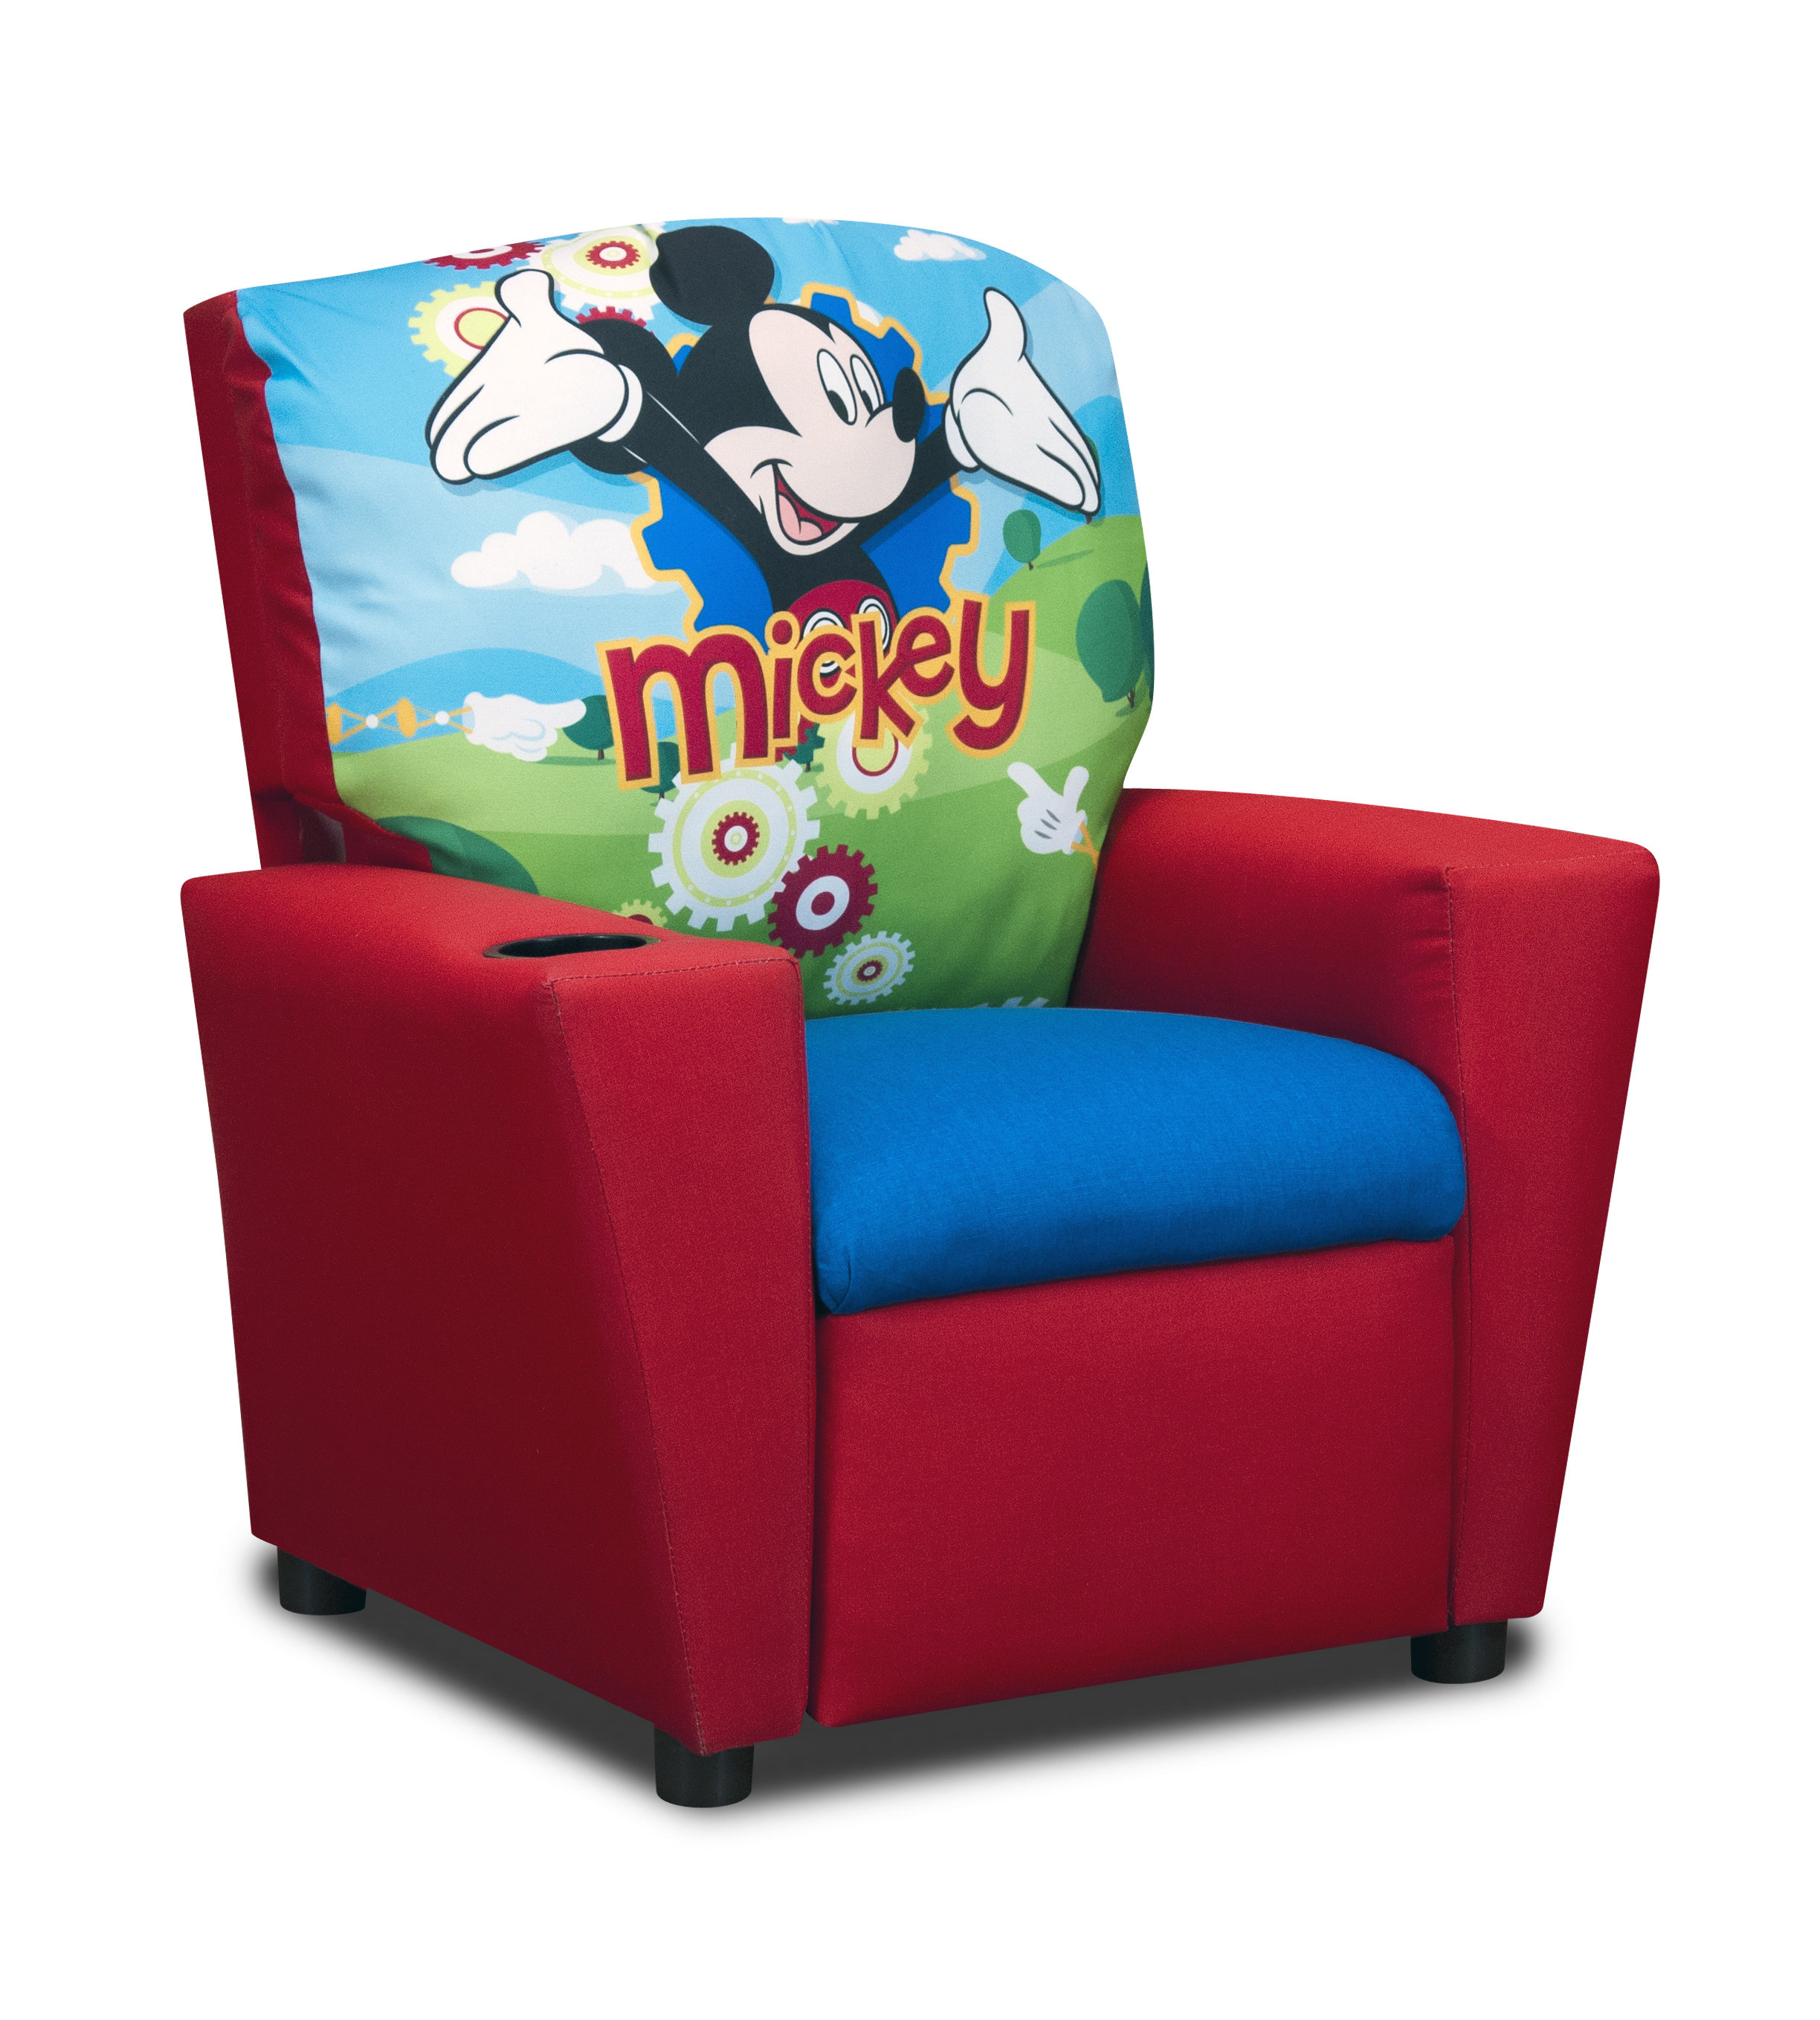 KidzWorld Disneys Mickey Mouse Clubhouse Kids Cotton Recliner Chair